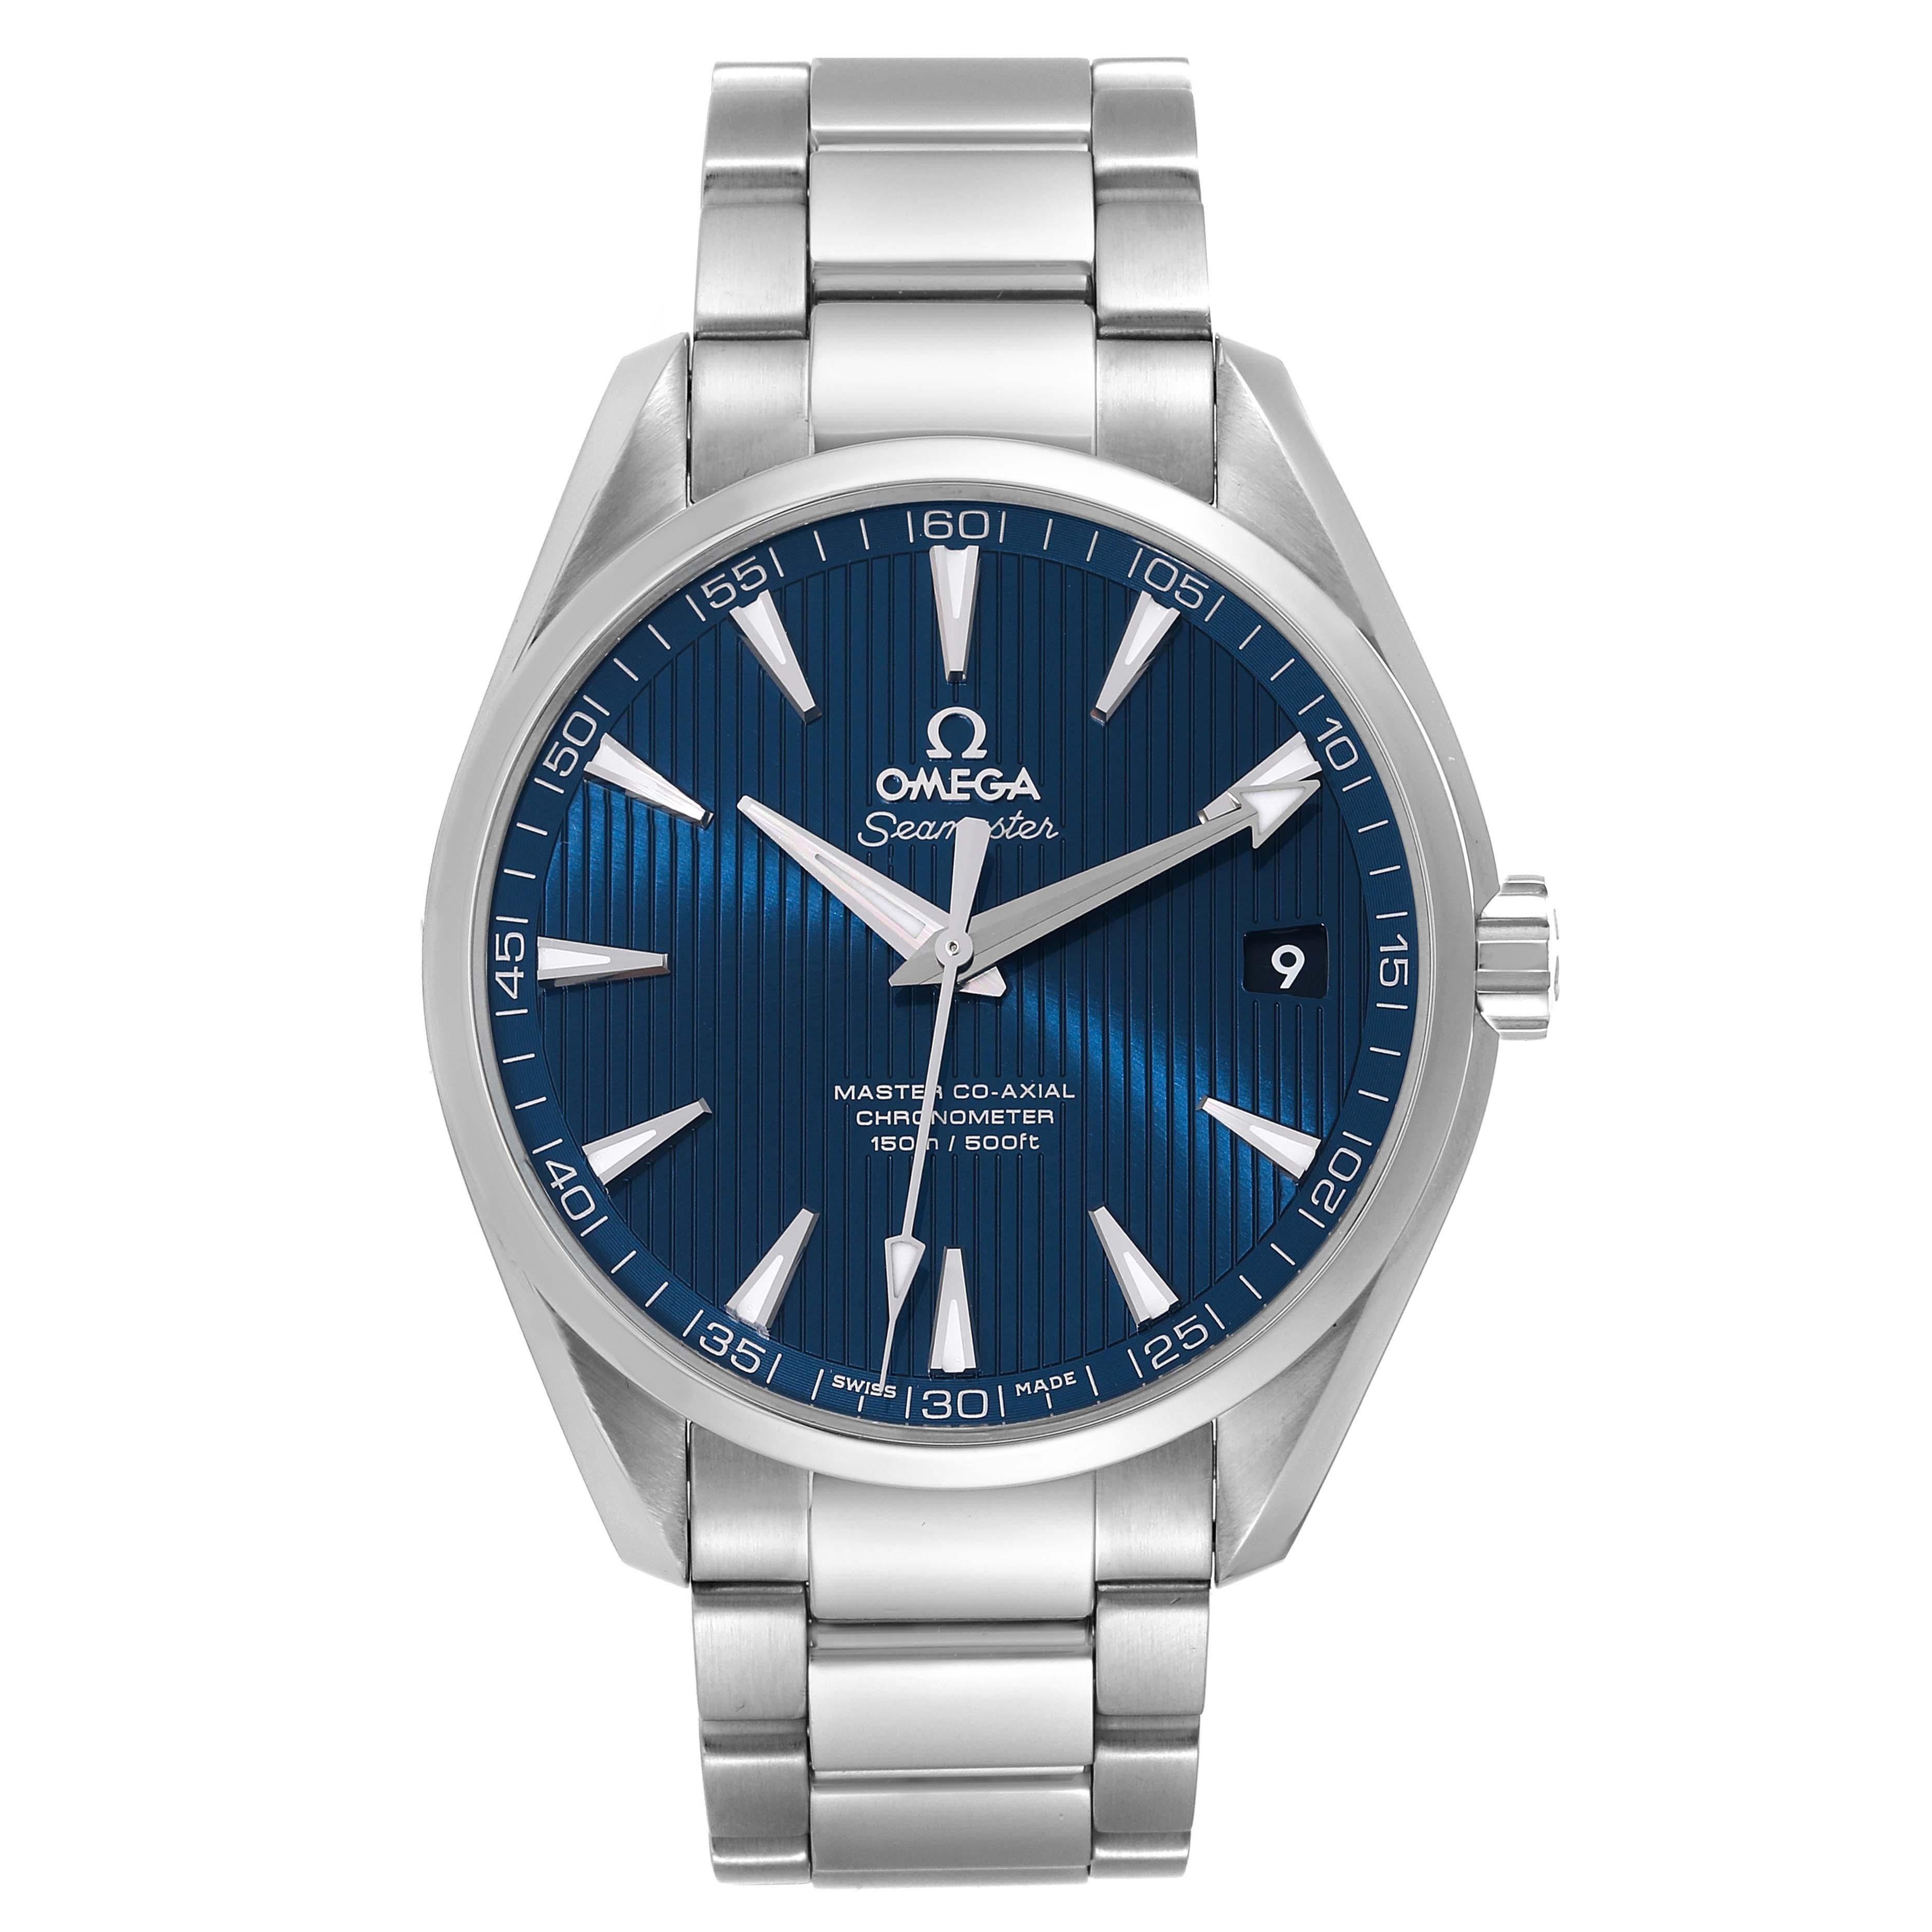 Omega Seamaster Aqua Terra Steel Mens Watch 231.10.42.21.03.003 Box Card. Automatic self-winding movement. Stainless steel round case 41.5 mm in diameter. Transparent exhibition sapphire crystal caseback. Stainless steel smooth bezel. Scratch